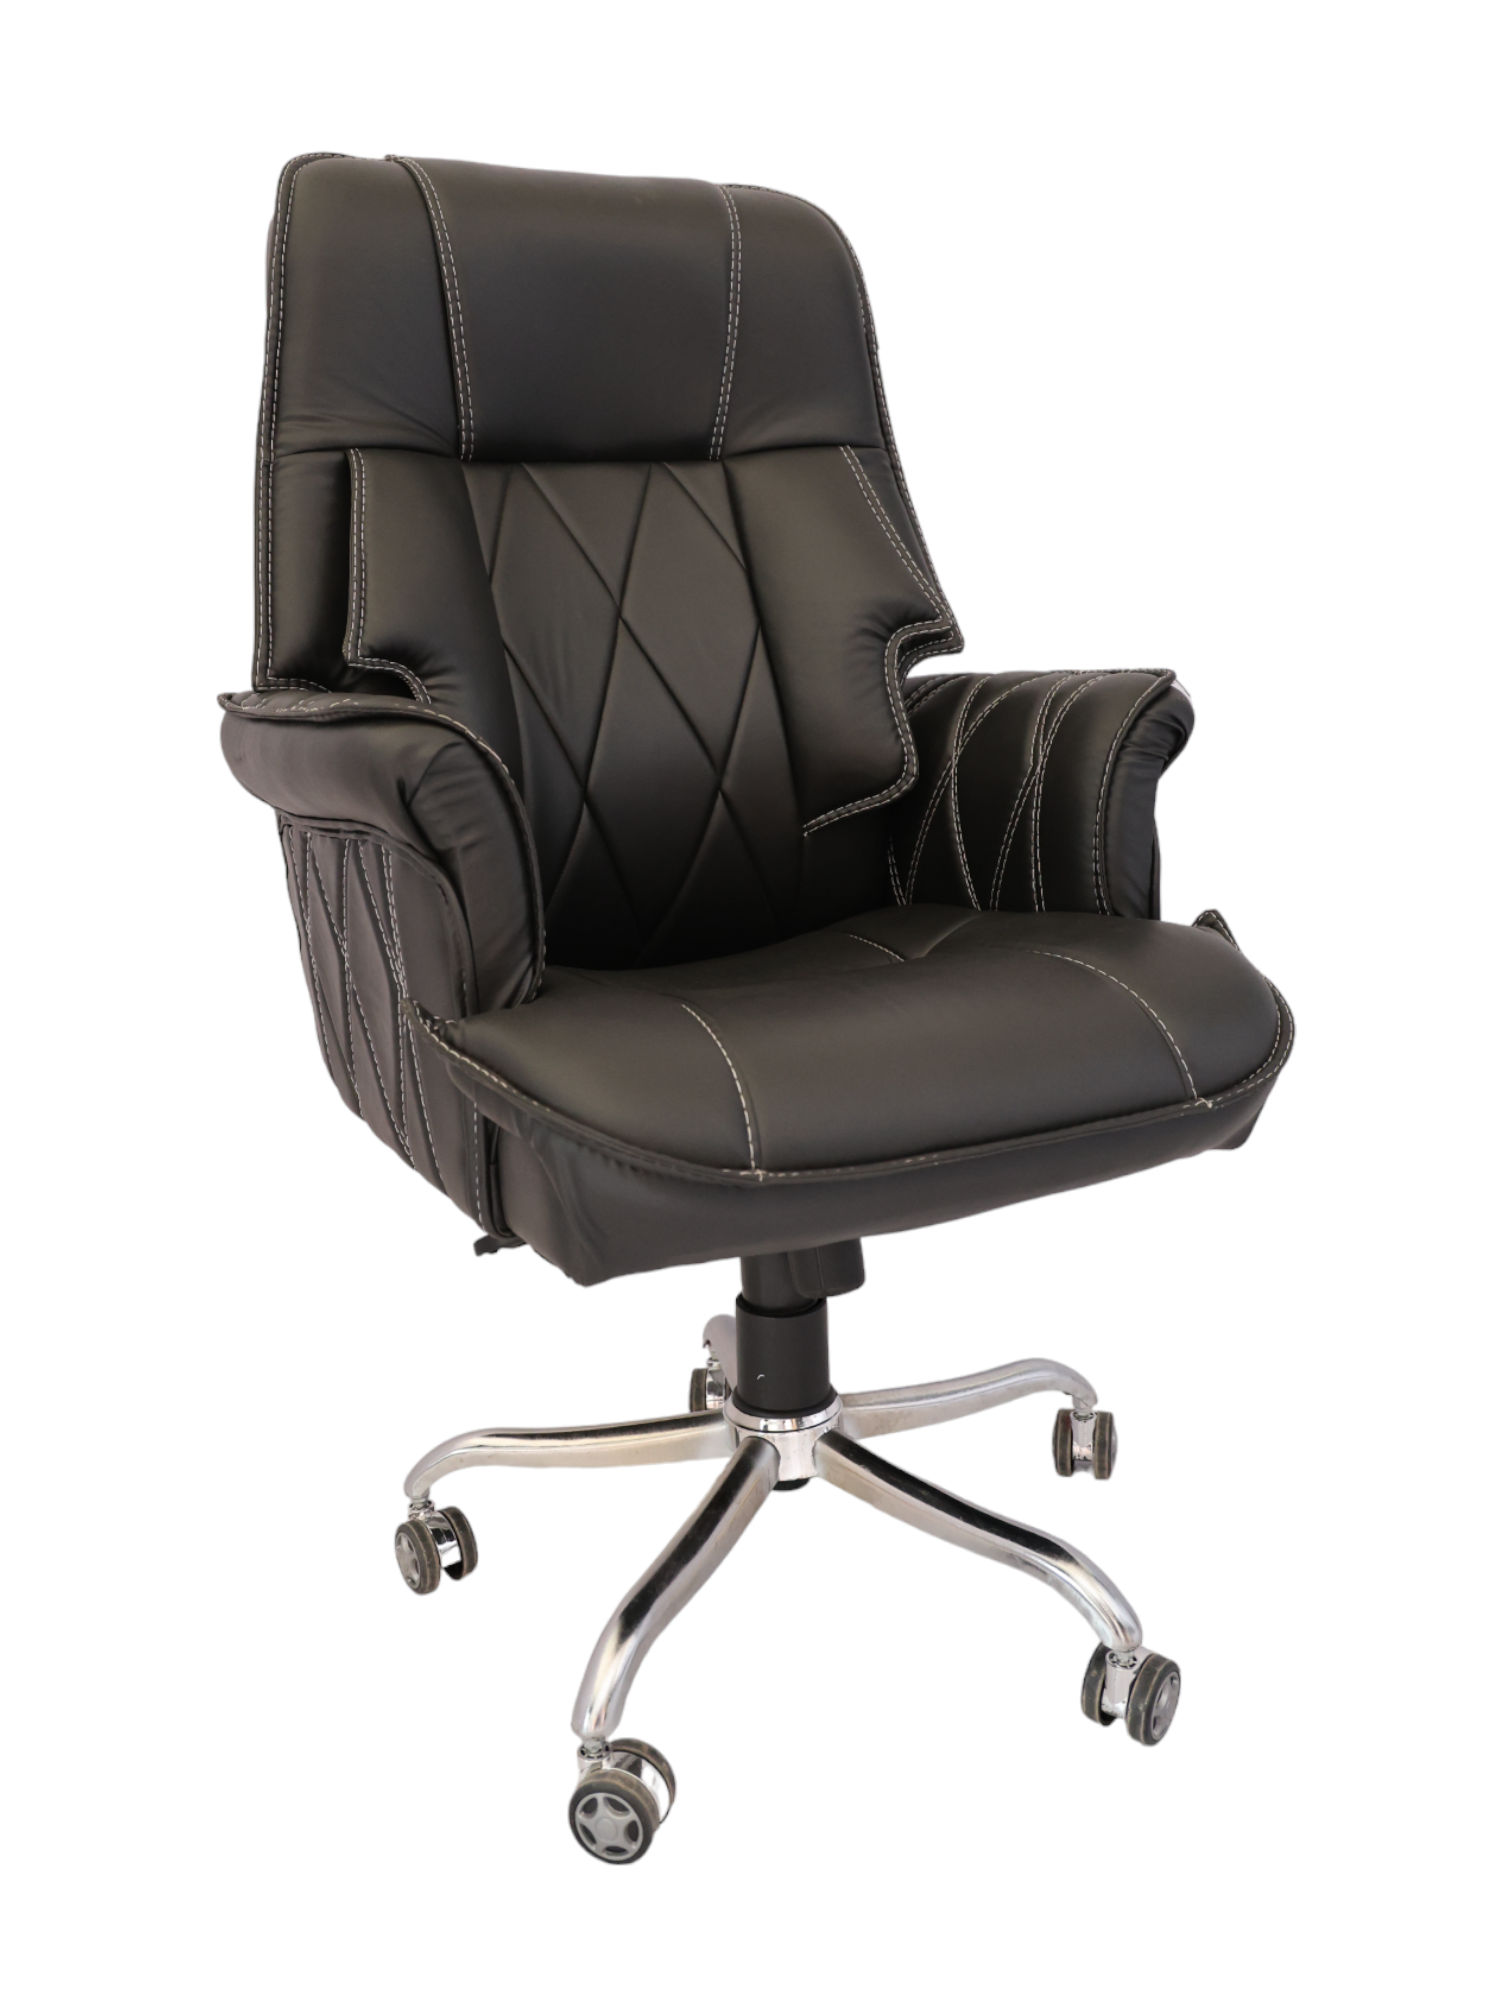 Adhunika High Back Boss Office Chair With Leather Seat (Black 28x23x49)